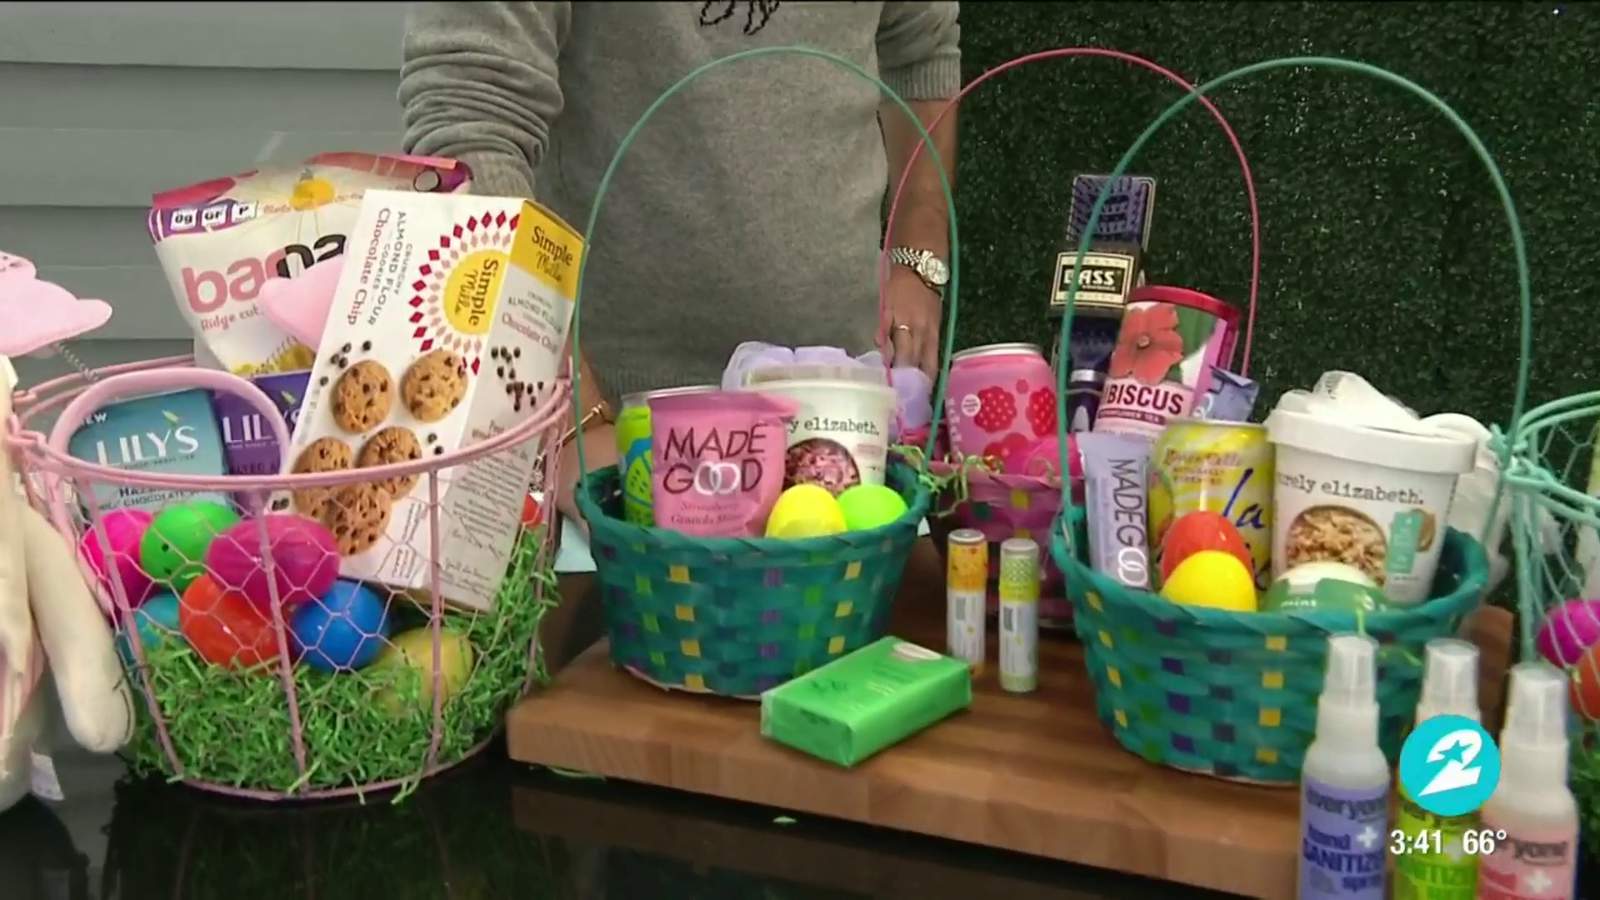 Forget about candy, here are some ‘healthier’ ways to celebrate Easter at home